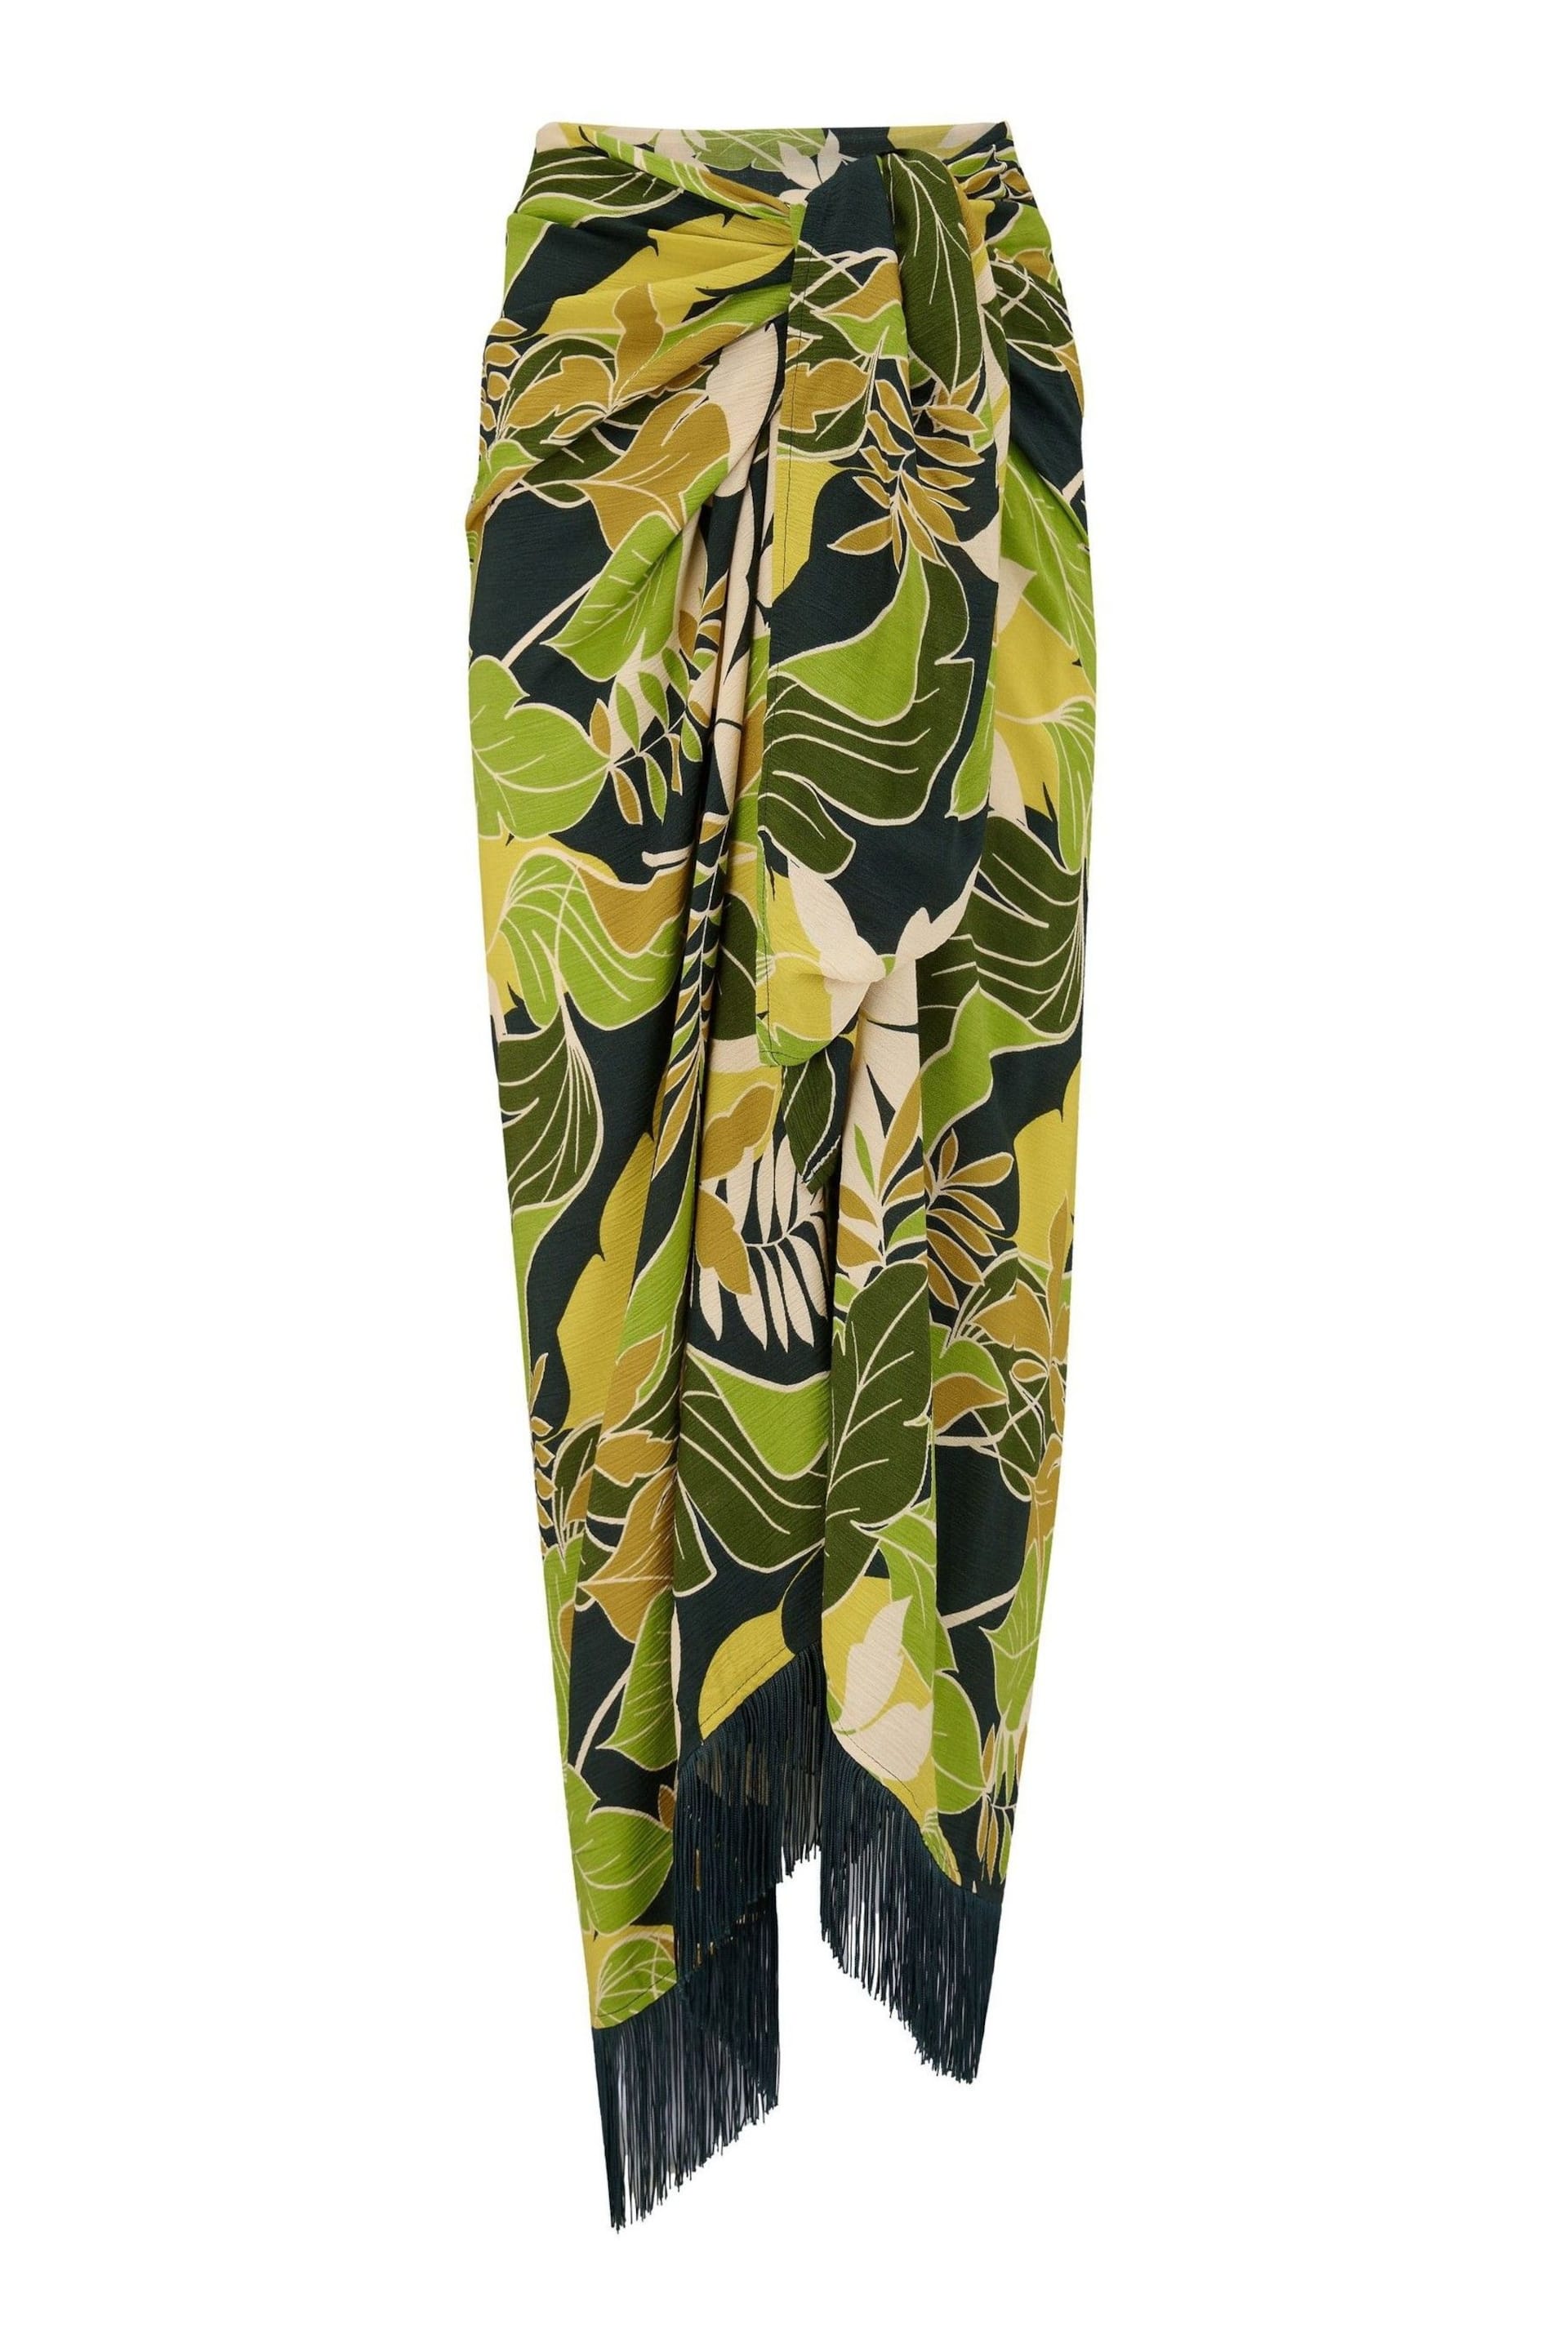 Pour Moi Green Fringe Trim Crinkle Woven Multiway Sarong - Image 3 of 4